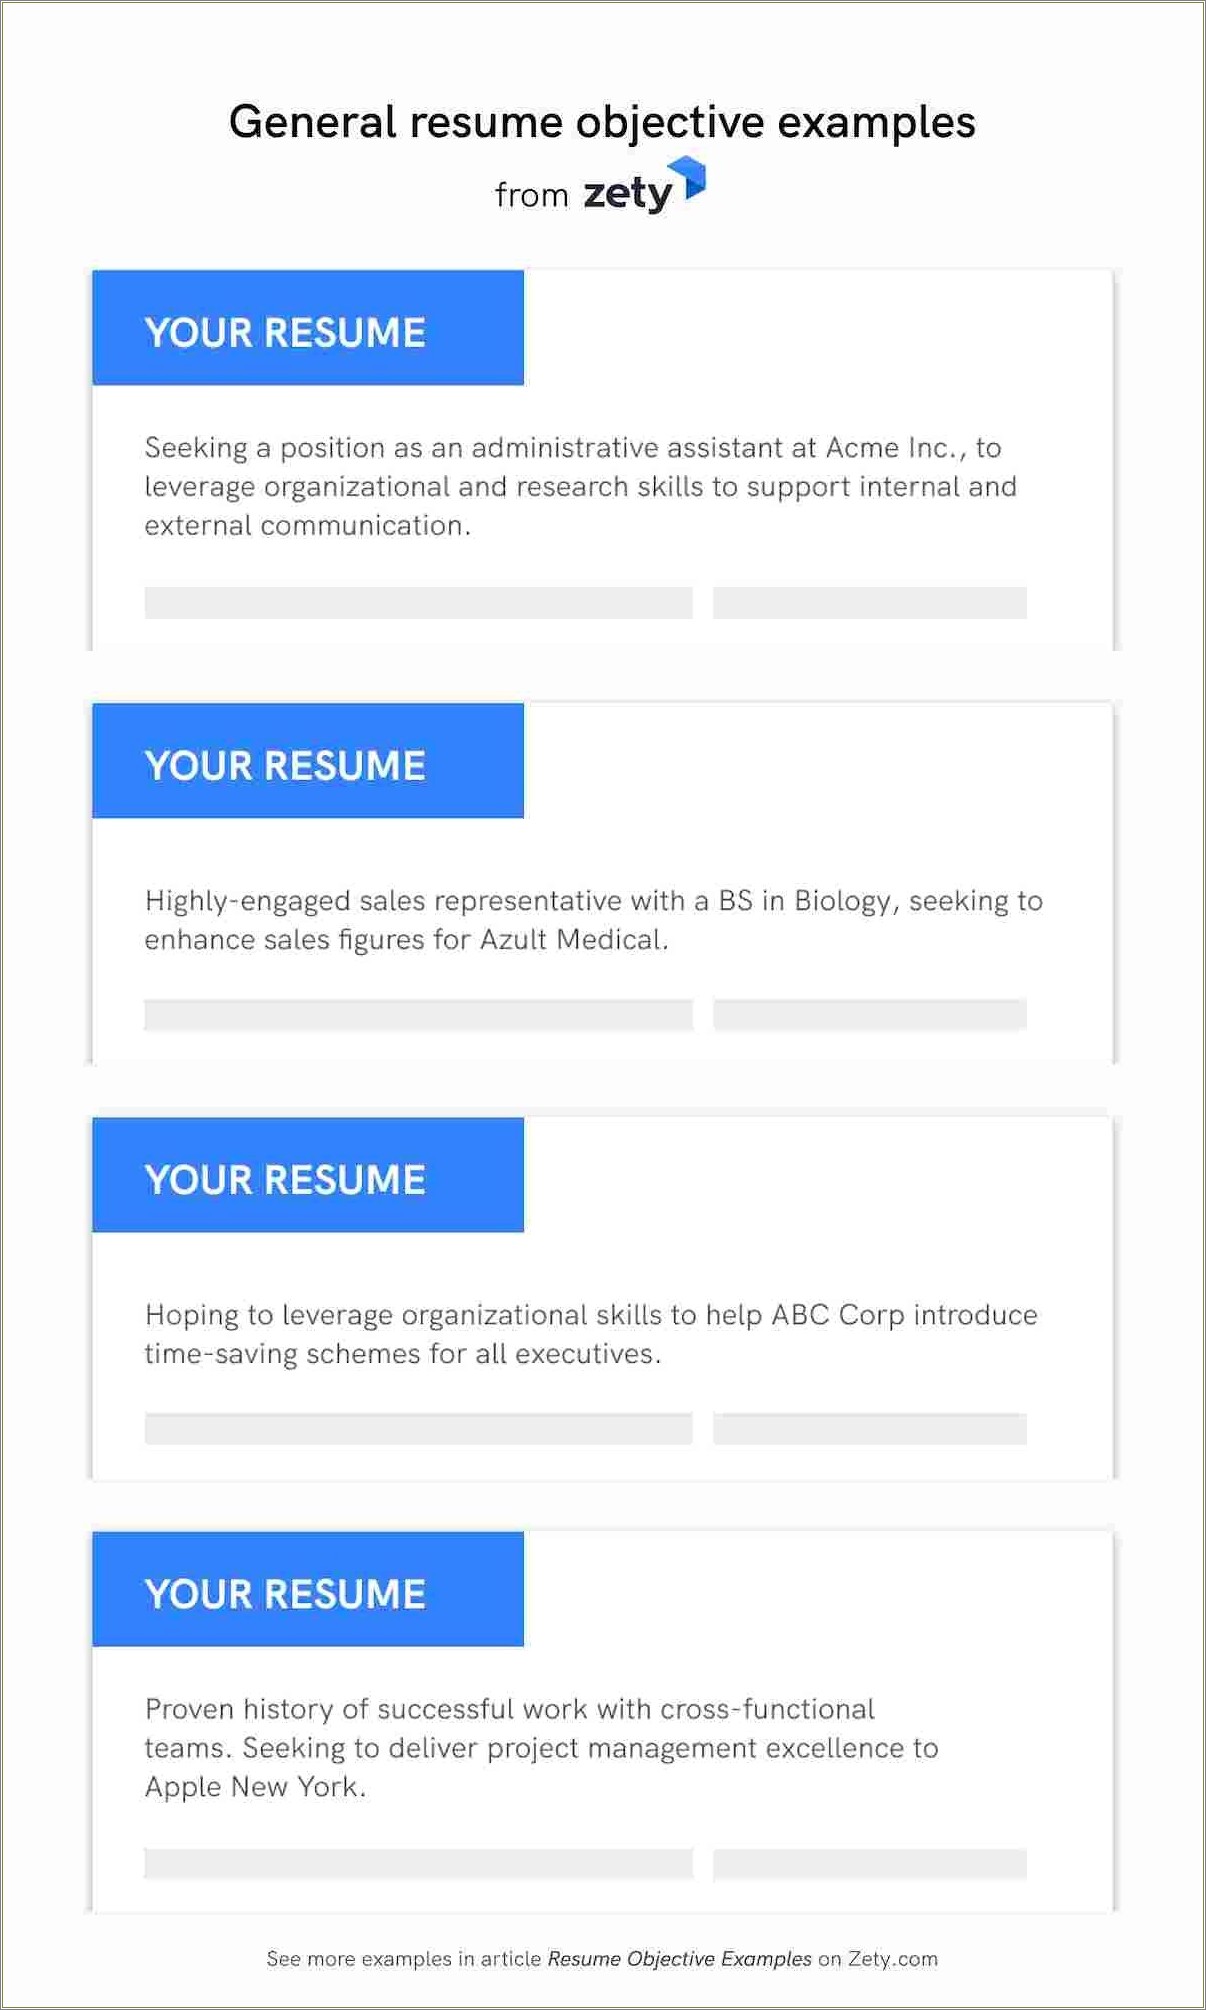 Objective Resume Examples For A New Job